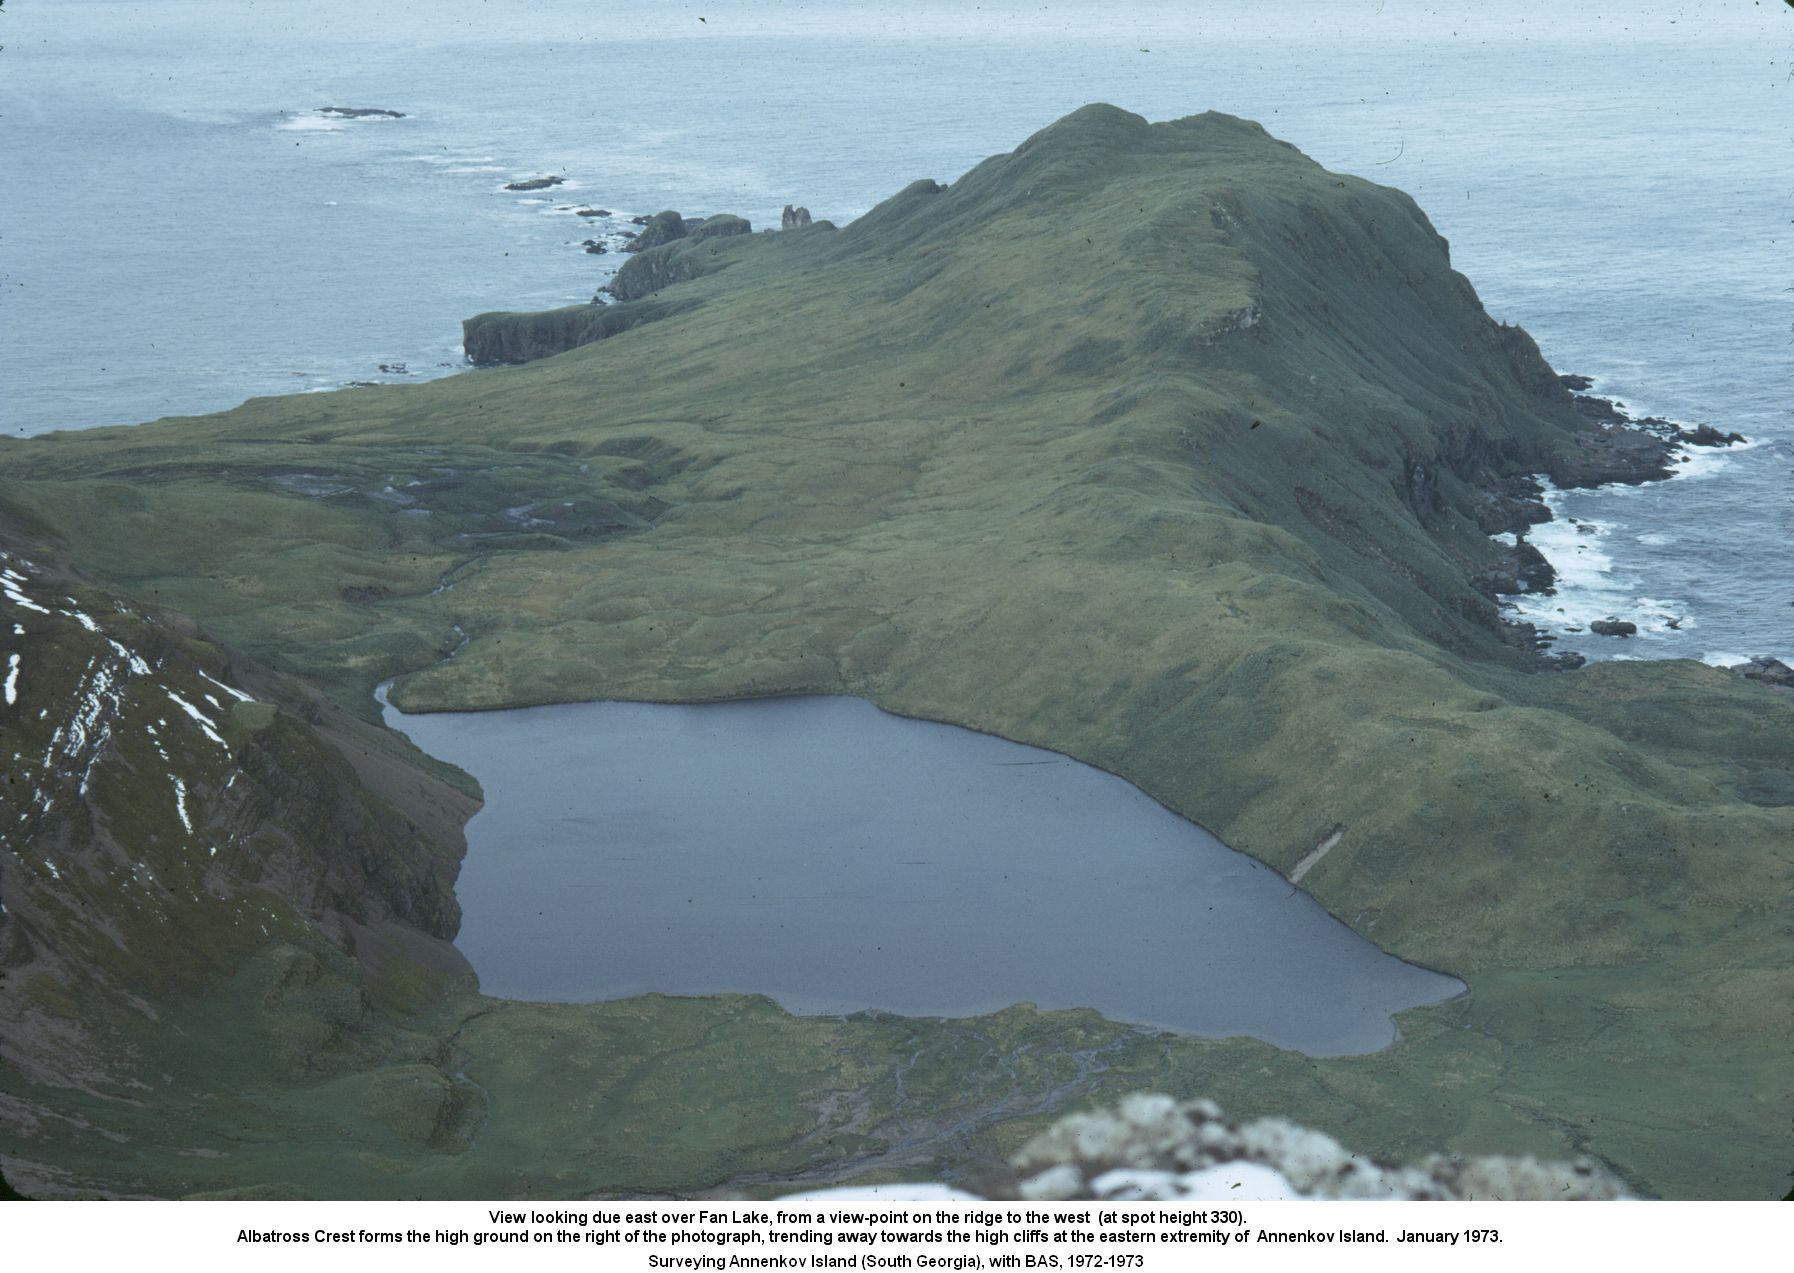 View looking due east over Fan Lake, from a view-point on the ridge to the west  (at spot height 330). 
Albatross Crest forms the high ground on the right of the photograph, trending away towards the high cliffs at the eastern extremity of  Annenkov Island.  January 1973.